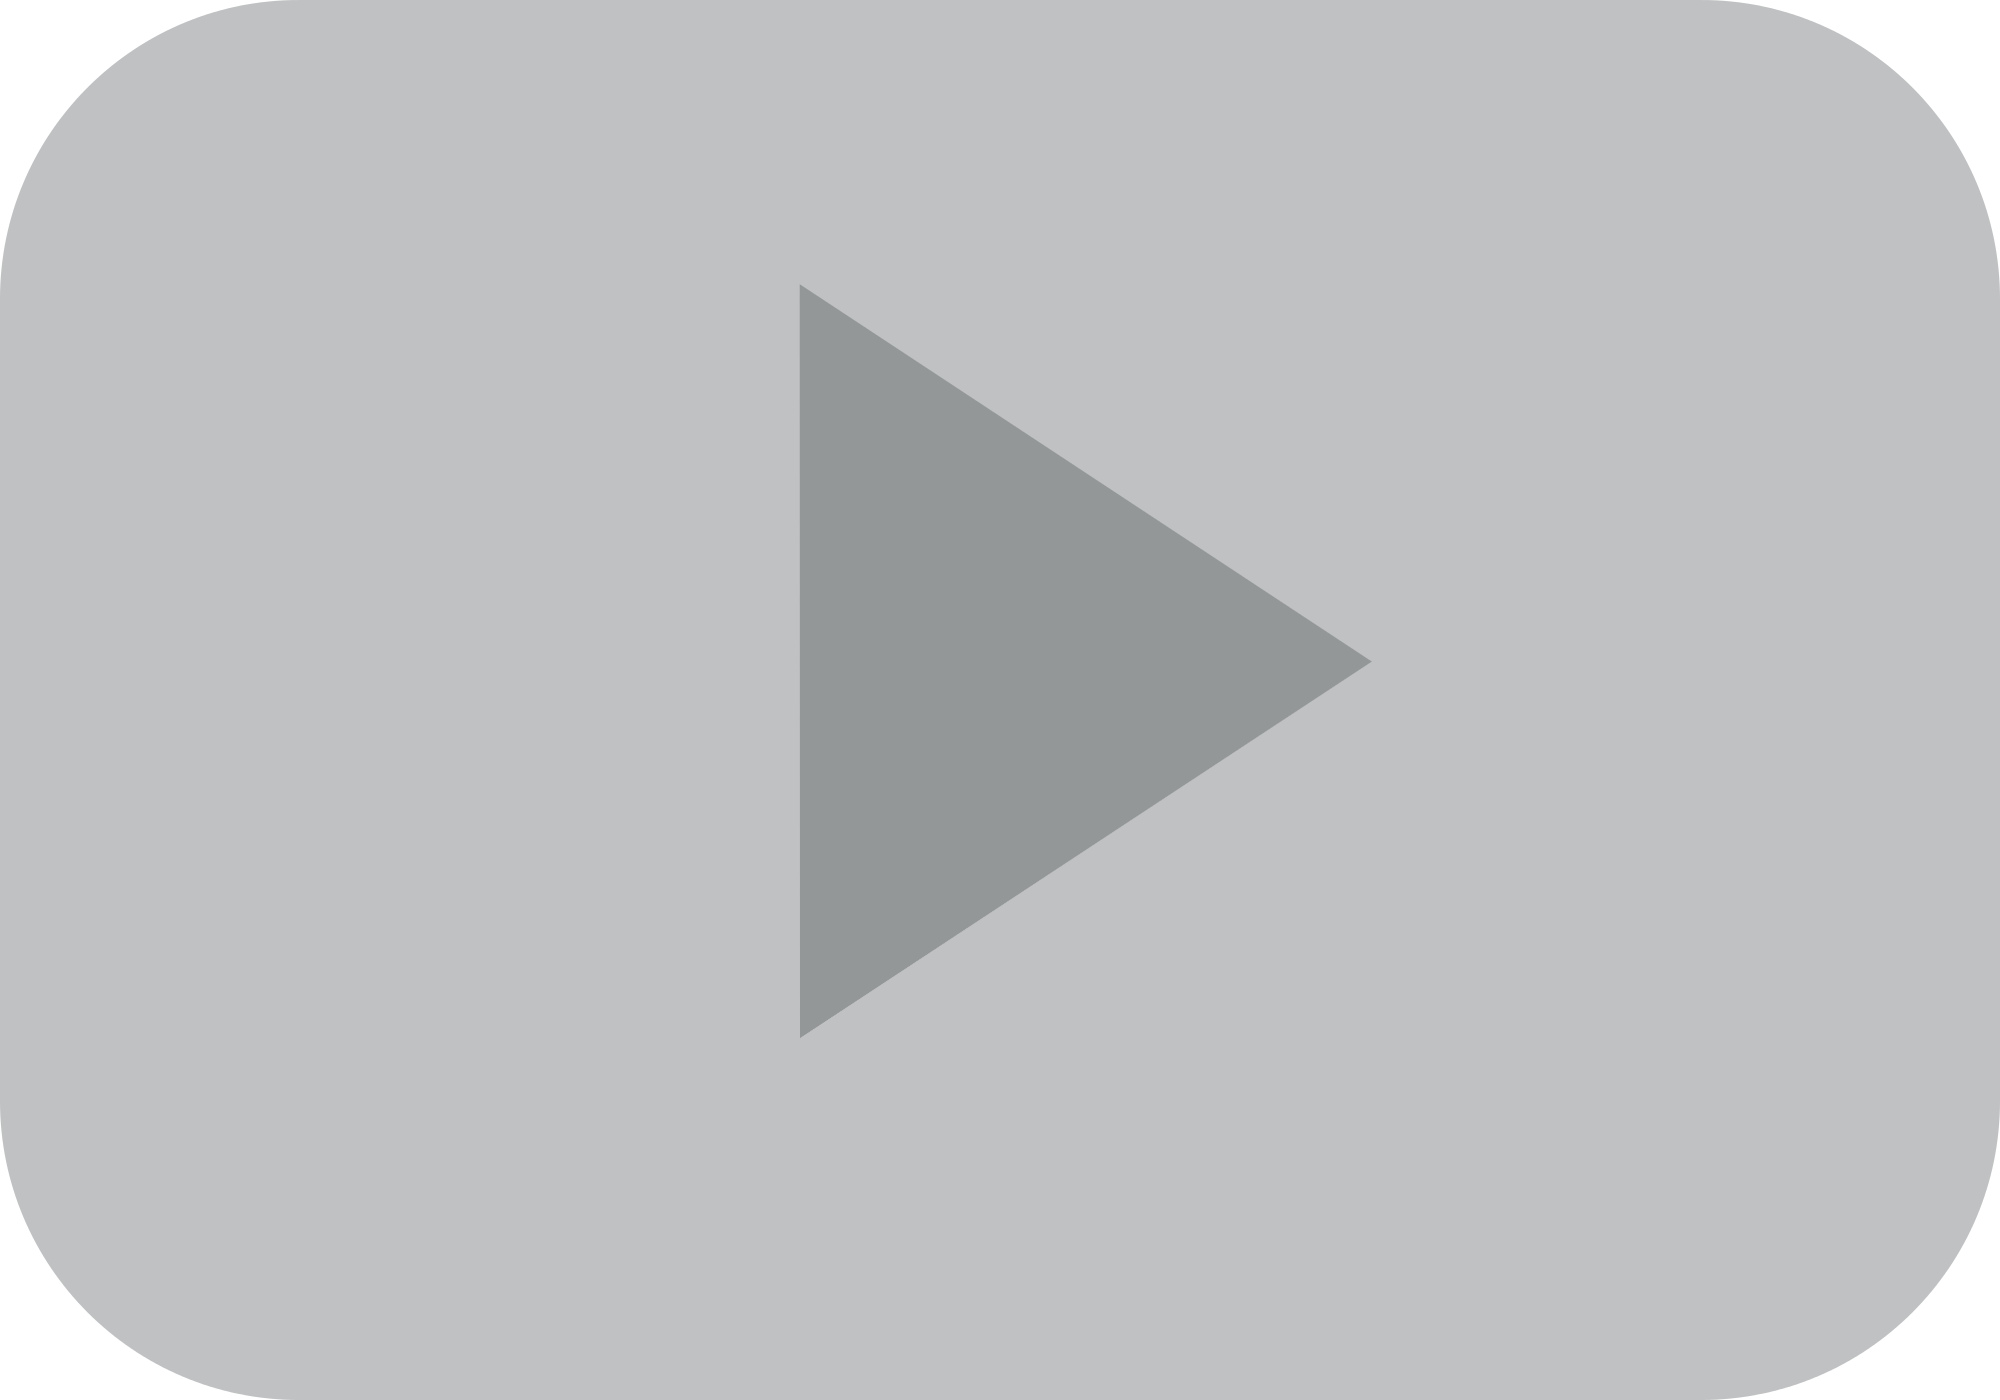 YouTube Play Button PNG Transparent Image